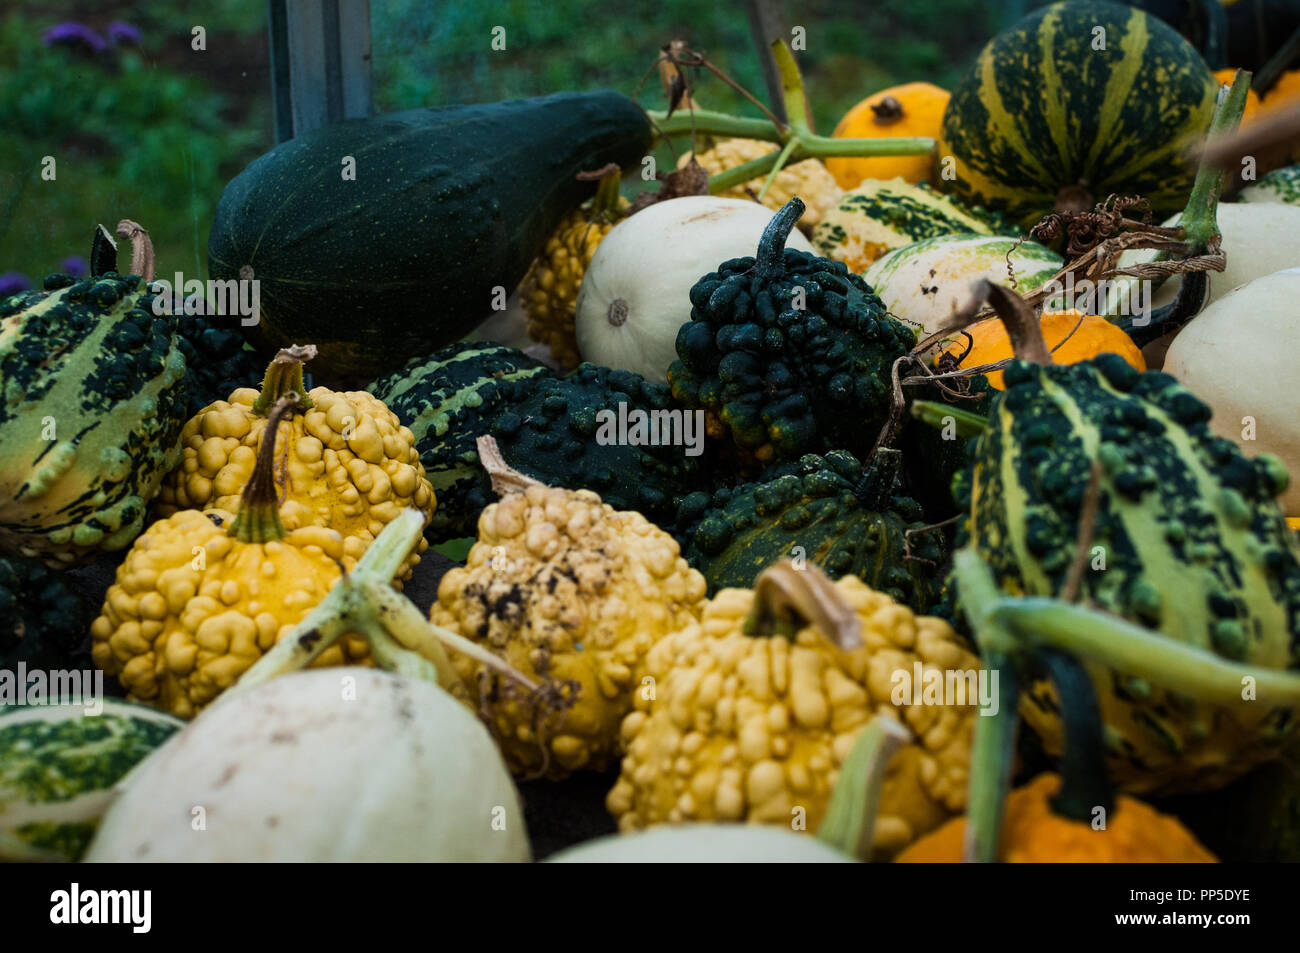 Fantastic looking and creepy Autumn pumpkins used traditionally for Halloween decorations. Stock Photo